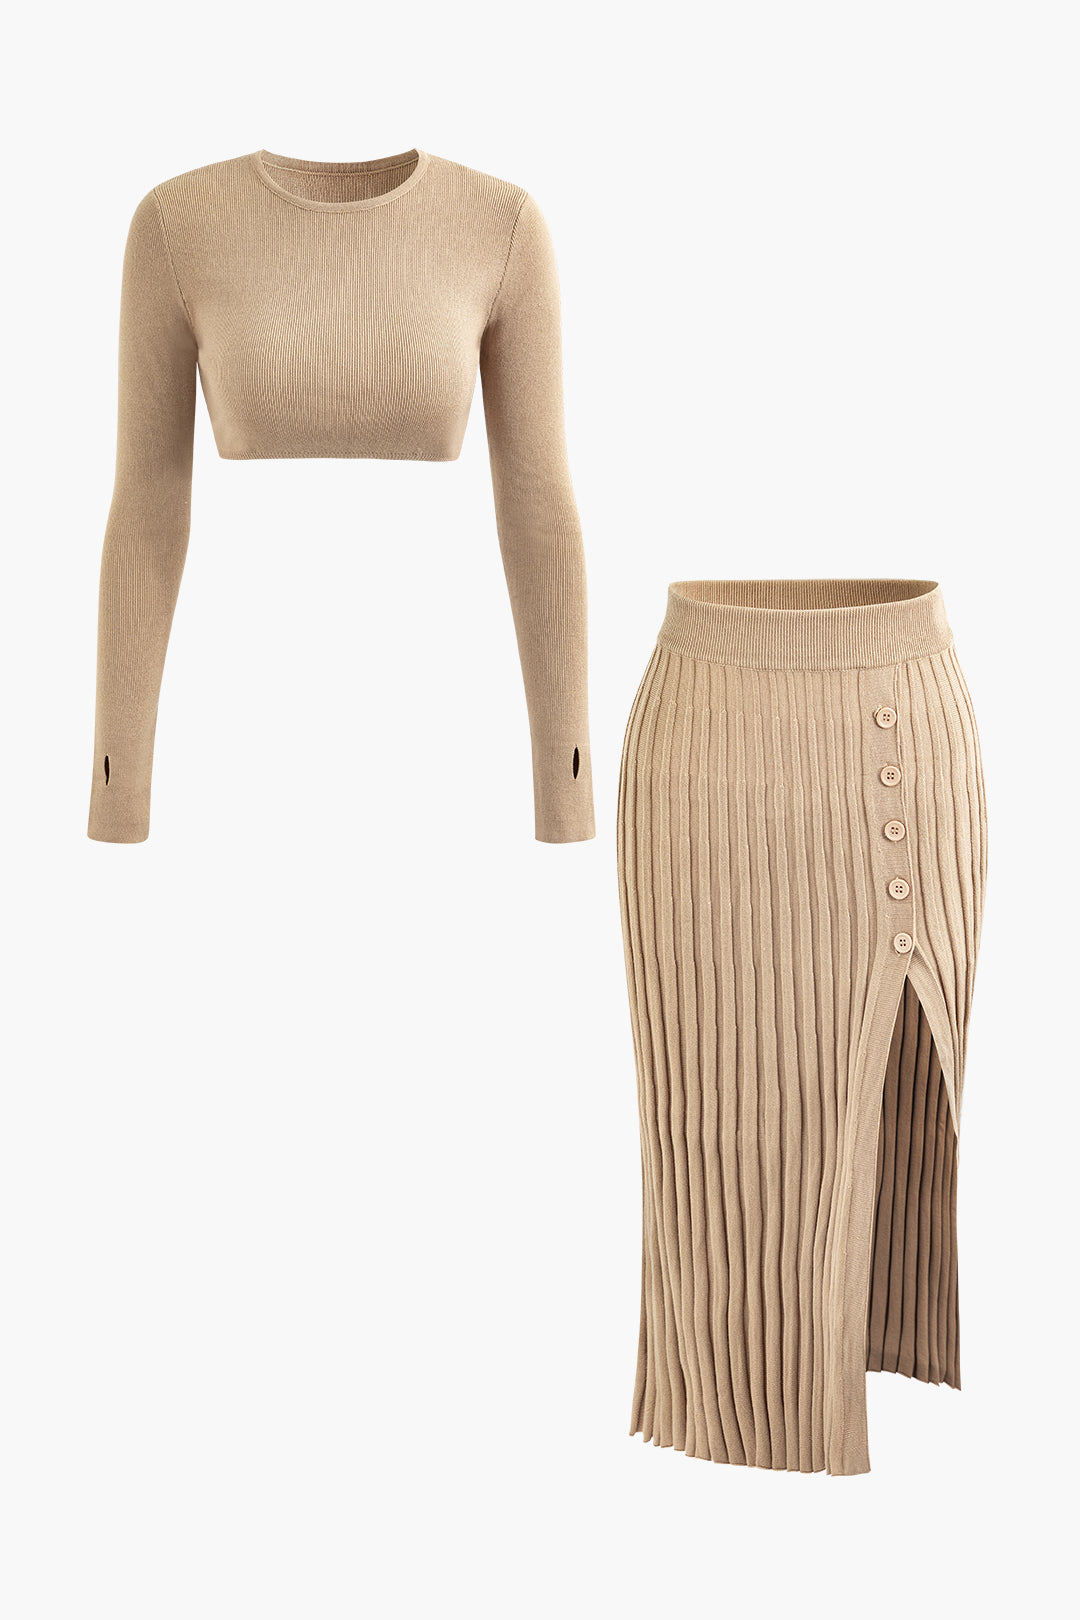 Round Neck Long Sleeve Knit Crop Top And Textured Knit Slit Skirt Set